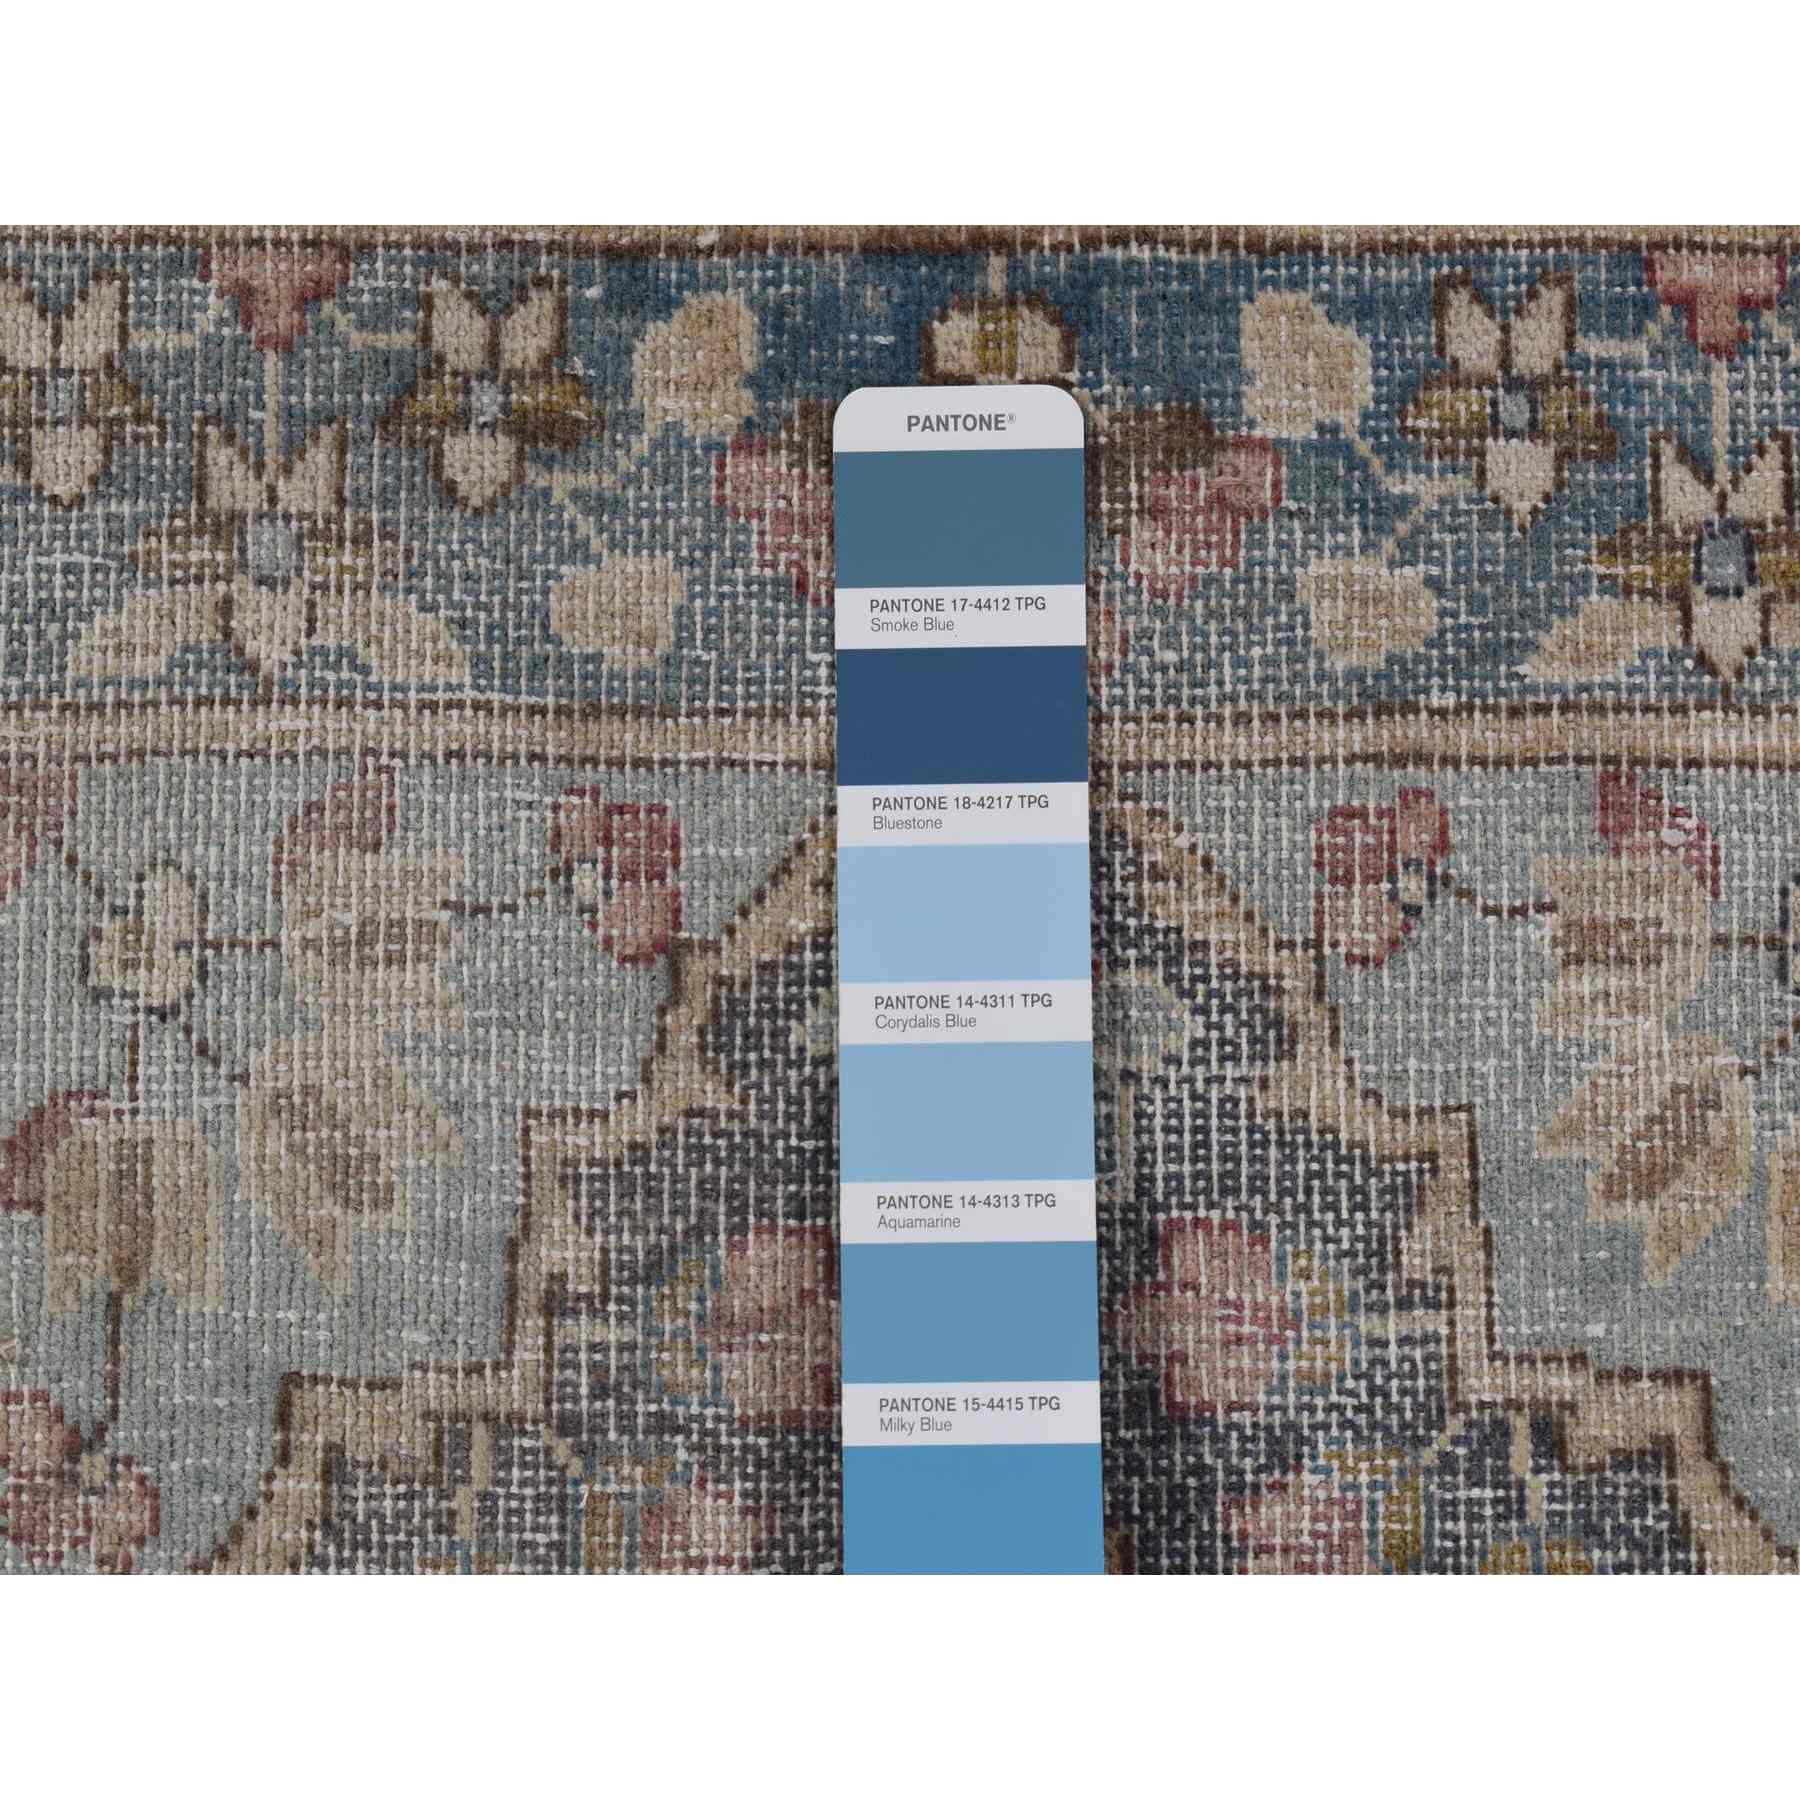 Overdyed-Vintage-Hand-Knotted-Rug-401520